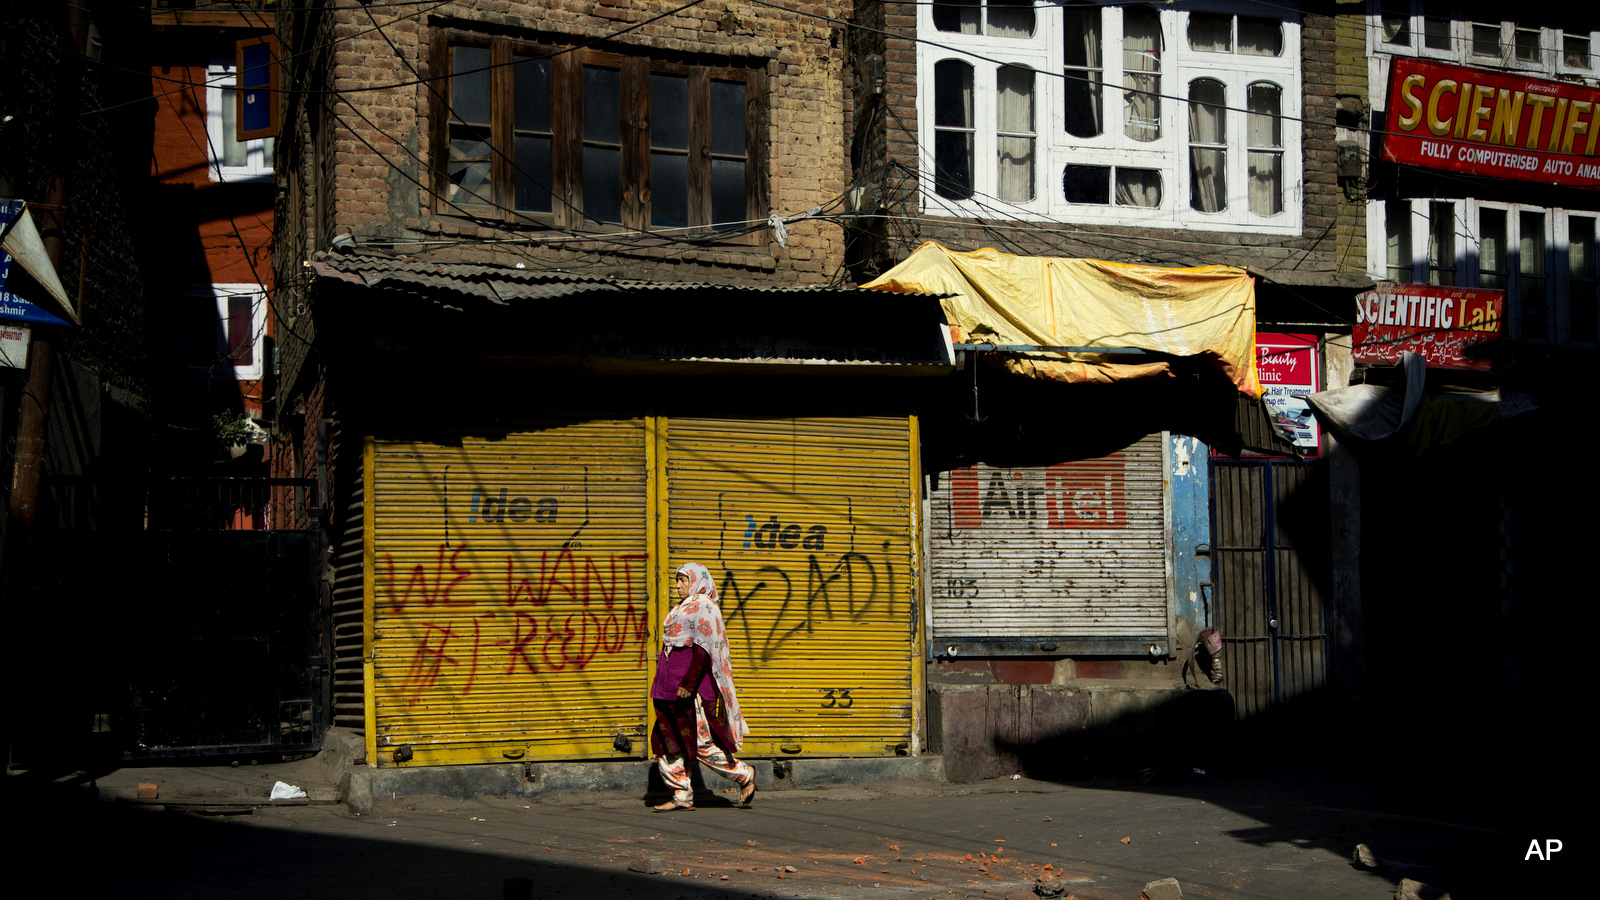 A Kashmiri woman walks on a road dotted with bricks and stones after a protest during curfew in Srinagar, Indian occupied Kashmir, Friday, Sept. 30, 2016.